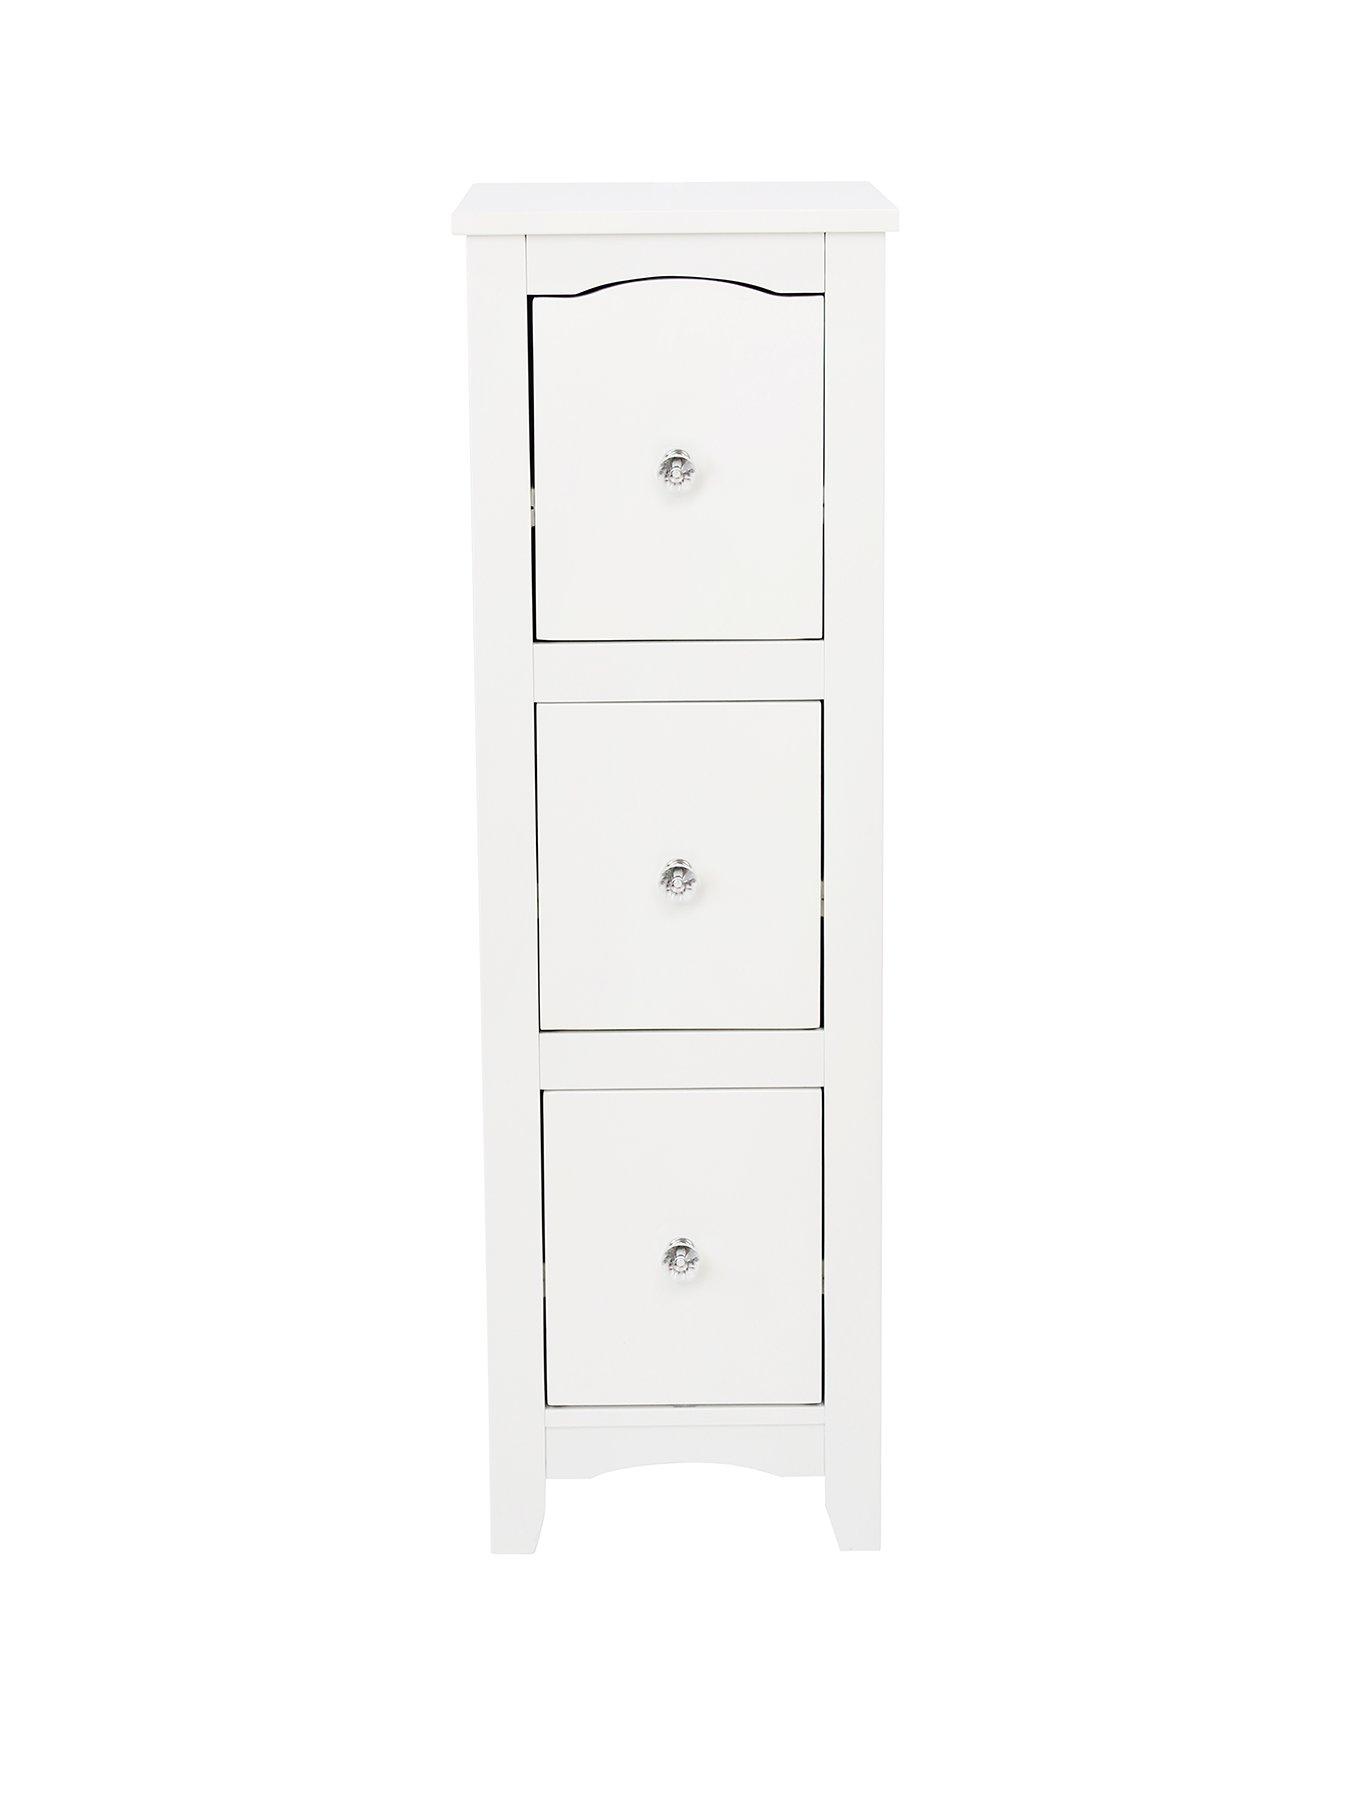 Lloyd Pascal Bude 3 Drawer Bathroom Cabinet Includes Chrome And